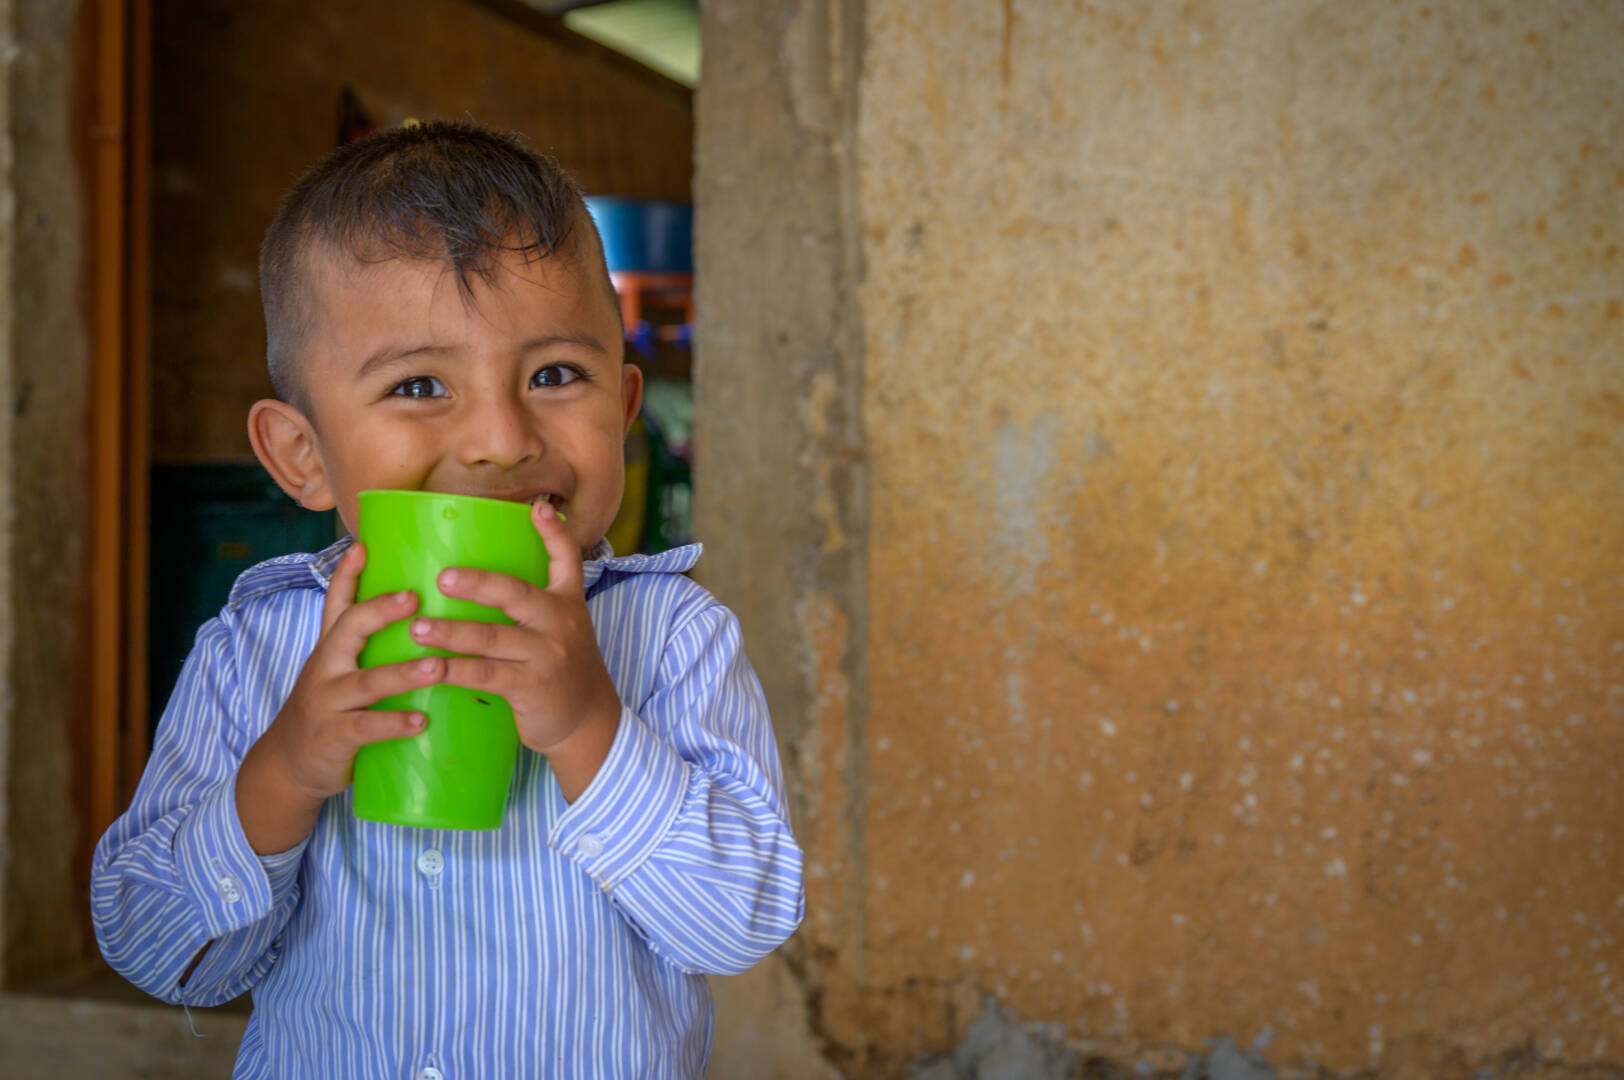 A boy smiles at the camera as he holds a green cup up to his lips.